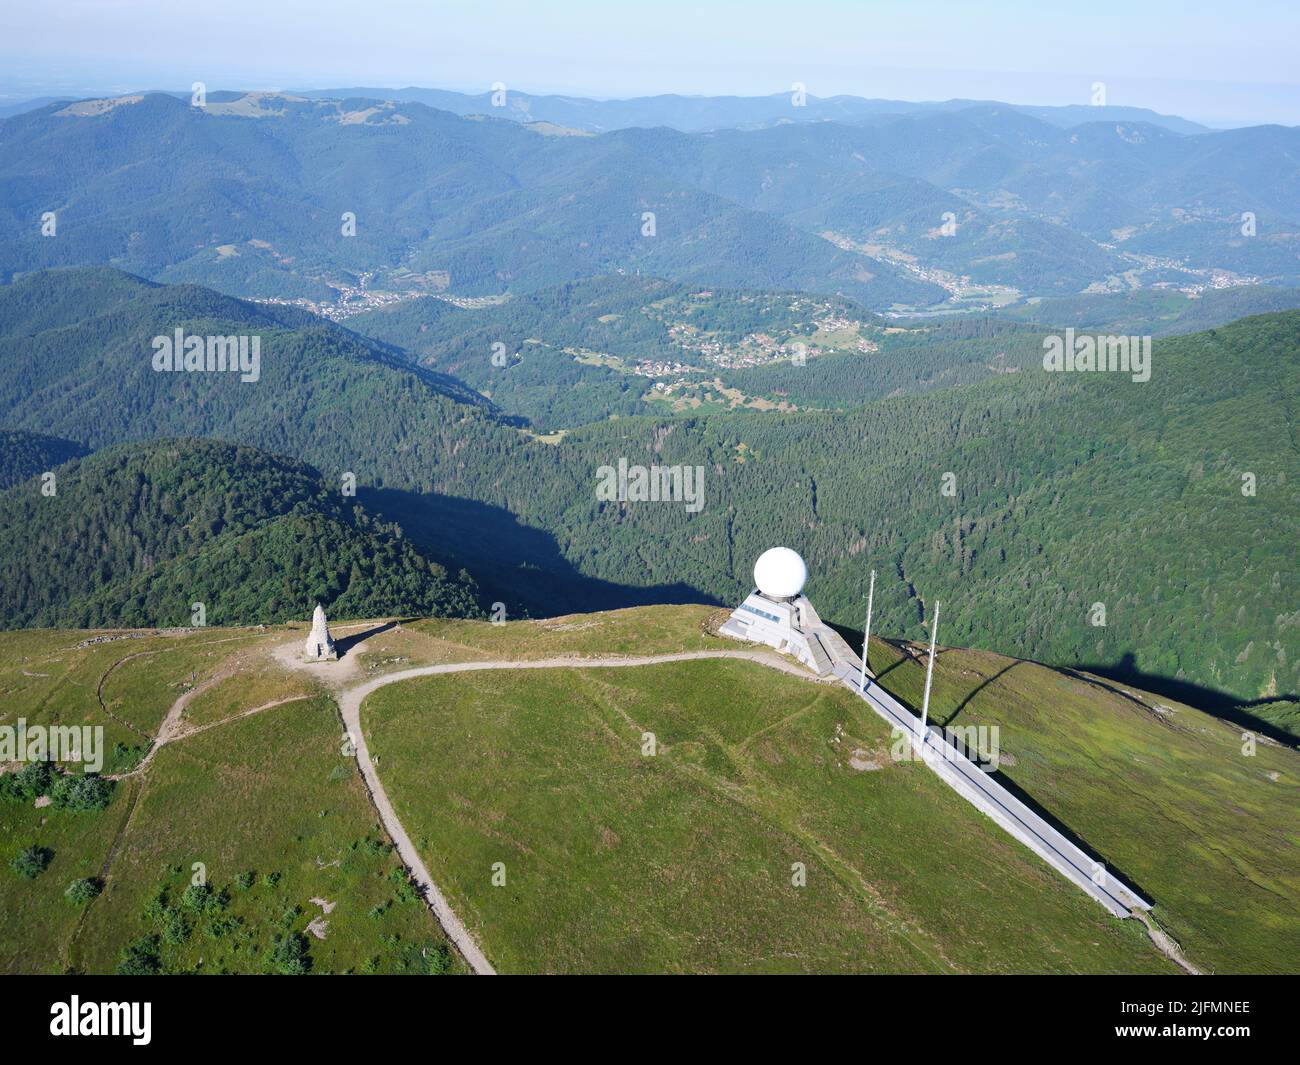 AERIAL VIEW. Aviation radar at the Grand Ballon, which is the highest summit (1423 meters) of the Vosges Massif. Haut-Rhin, Alsace, Grand Est, France. Stock Photo